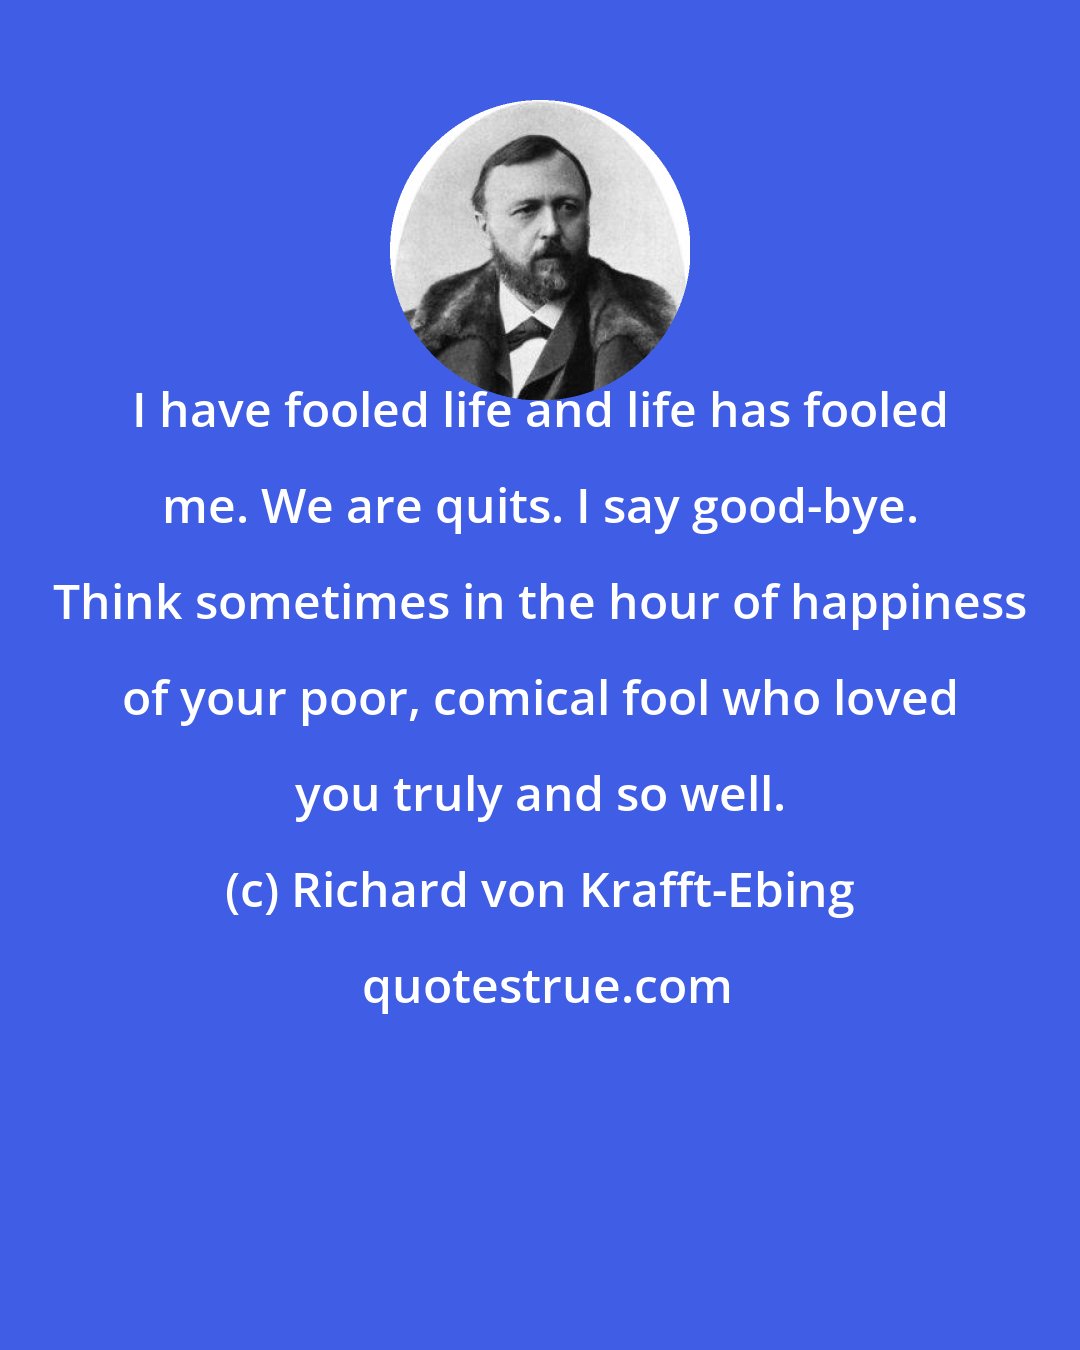 Richard von Krafft-Ebing: I have fooled life and life has fooled me. We are quits. I say good-bye. Think sometimes in the hour of happiness of your poor, comical fool who loved you truly and so well.